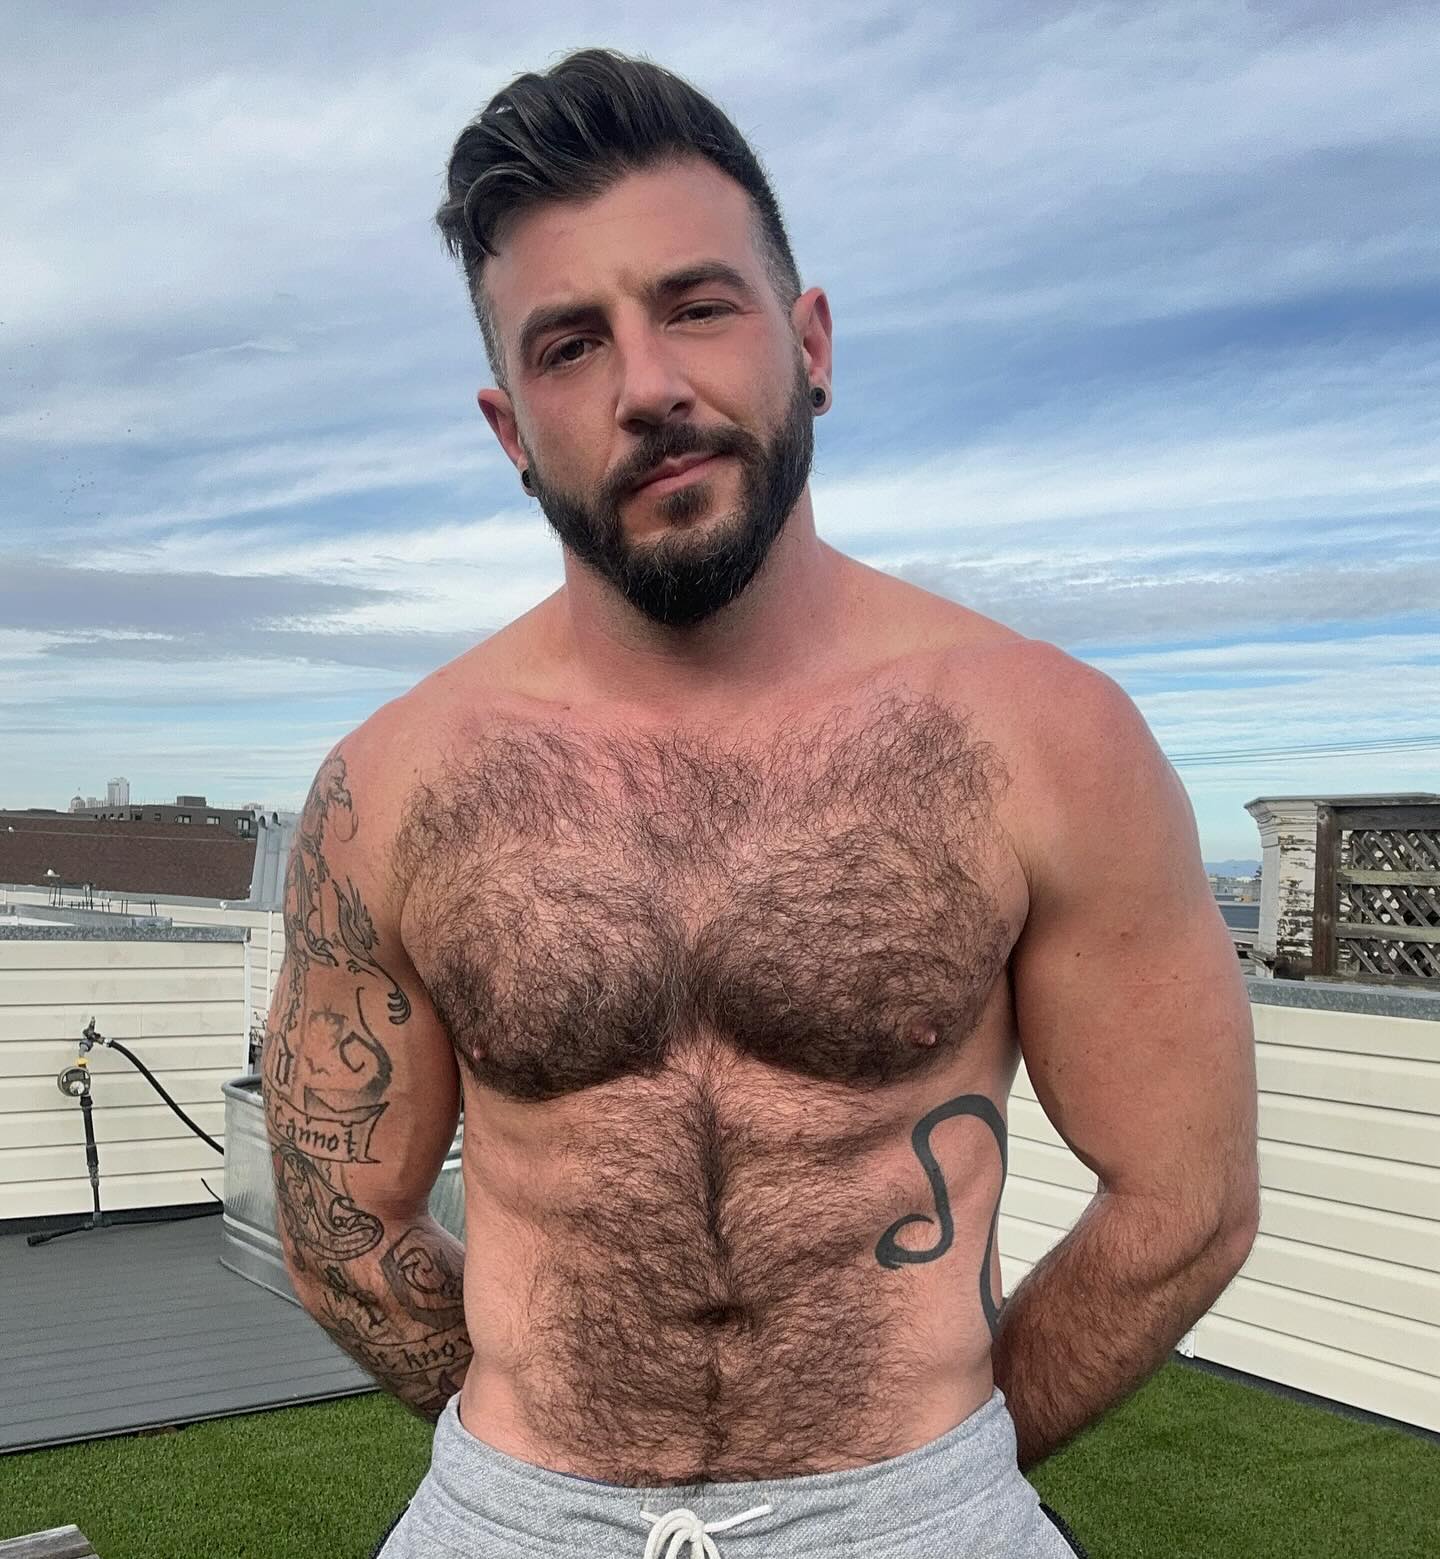 Little photoshoot on my new roof deck. The clouds were calling for it ☁️ 

.

.

.

.

.

.

#hikinggays #outdoorsygay #traillife #hairygaymen #hairygays #hairymuscles #hairymusclegay #hairysexy #sexyhairy #waterfall #musclegays #muscledad #muscledaddy💪 #musclesandtattoos